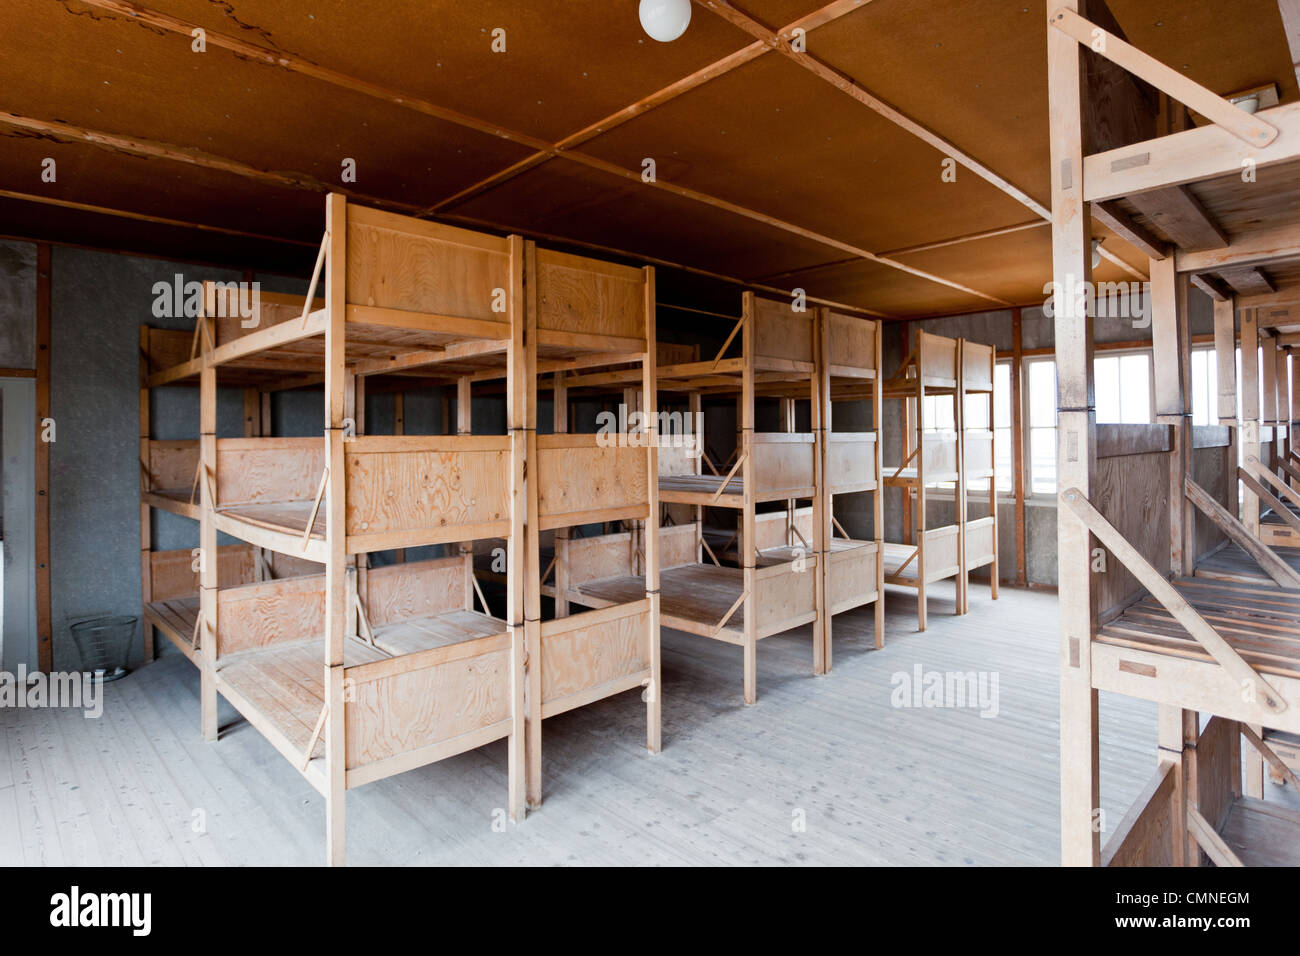 Dormitory area at Dachau Concentration Camp, Germany. Triple height wooden bunks for the prisoners in the dormitory barracks. Stock Photo